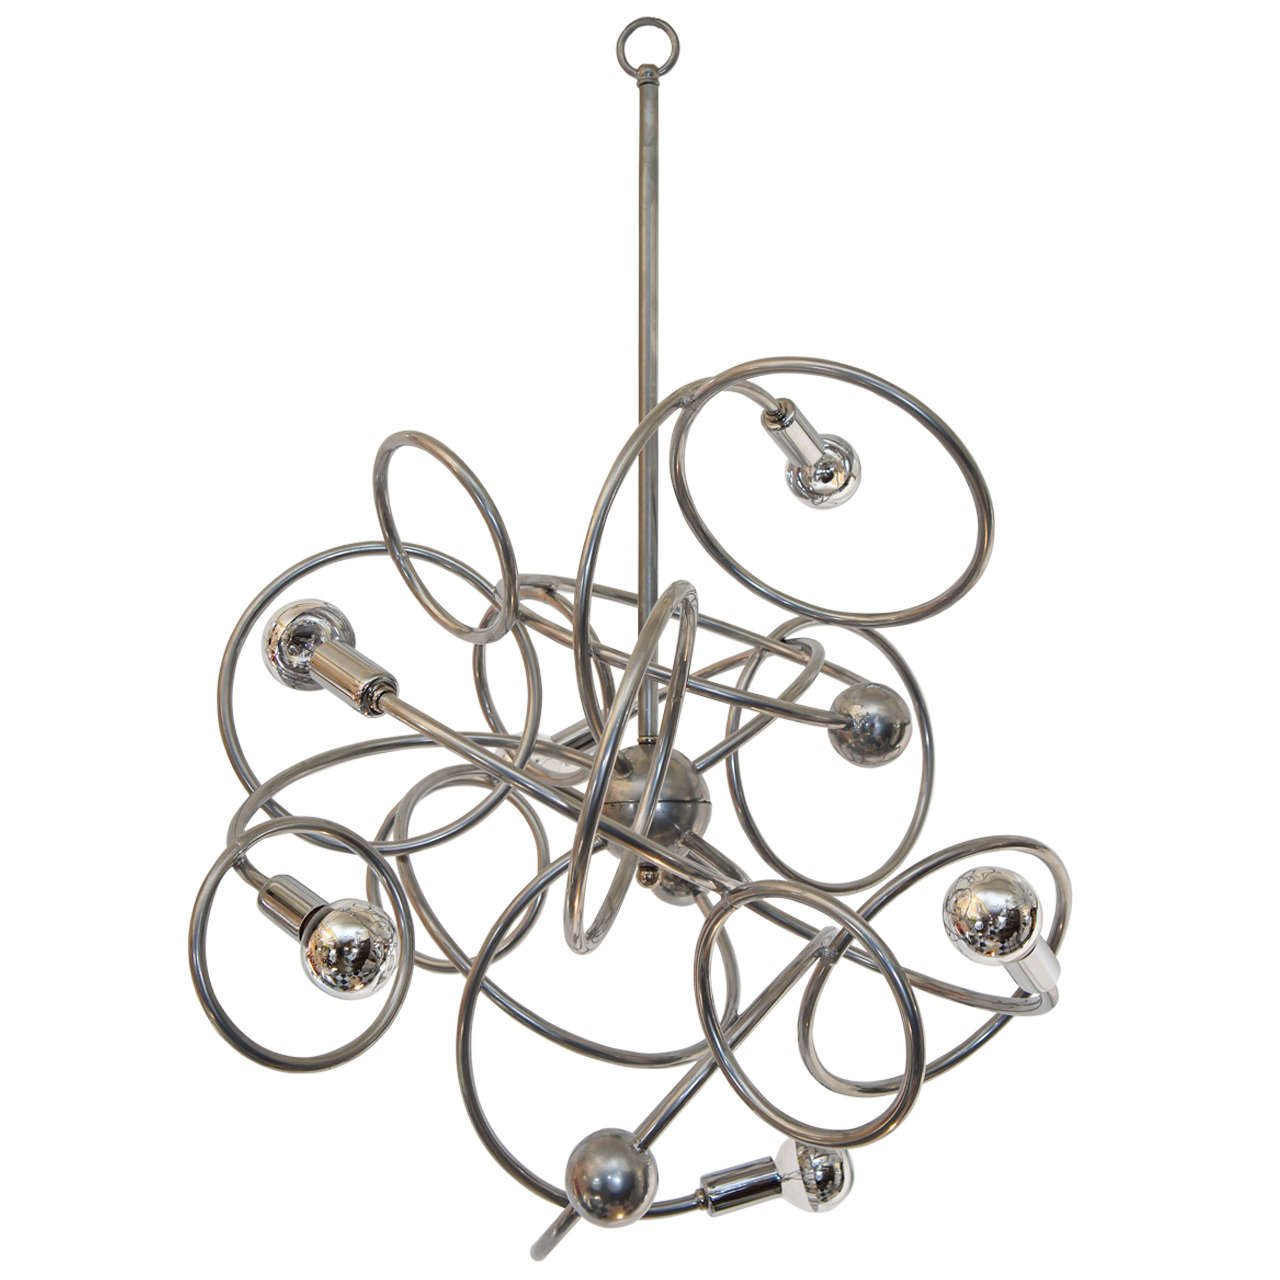 Custom Designed "Helix Aspersa-Discs" Chandelier, made in the USA, by Lou Blass For Sale